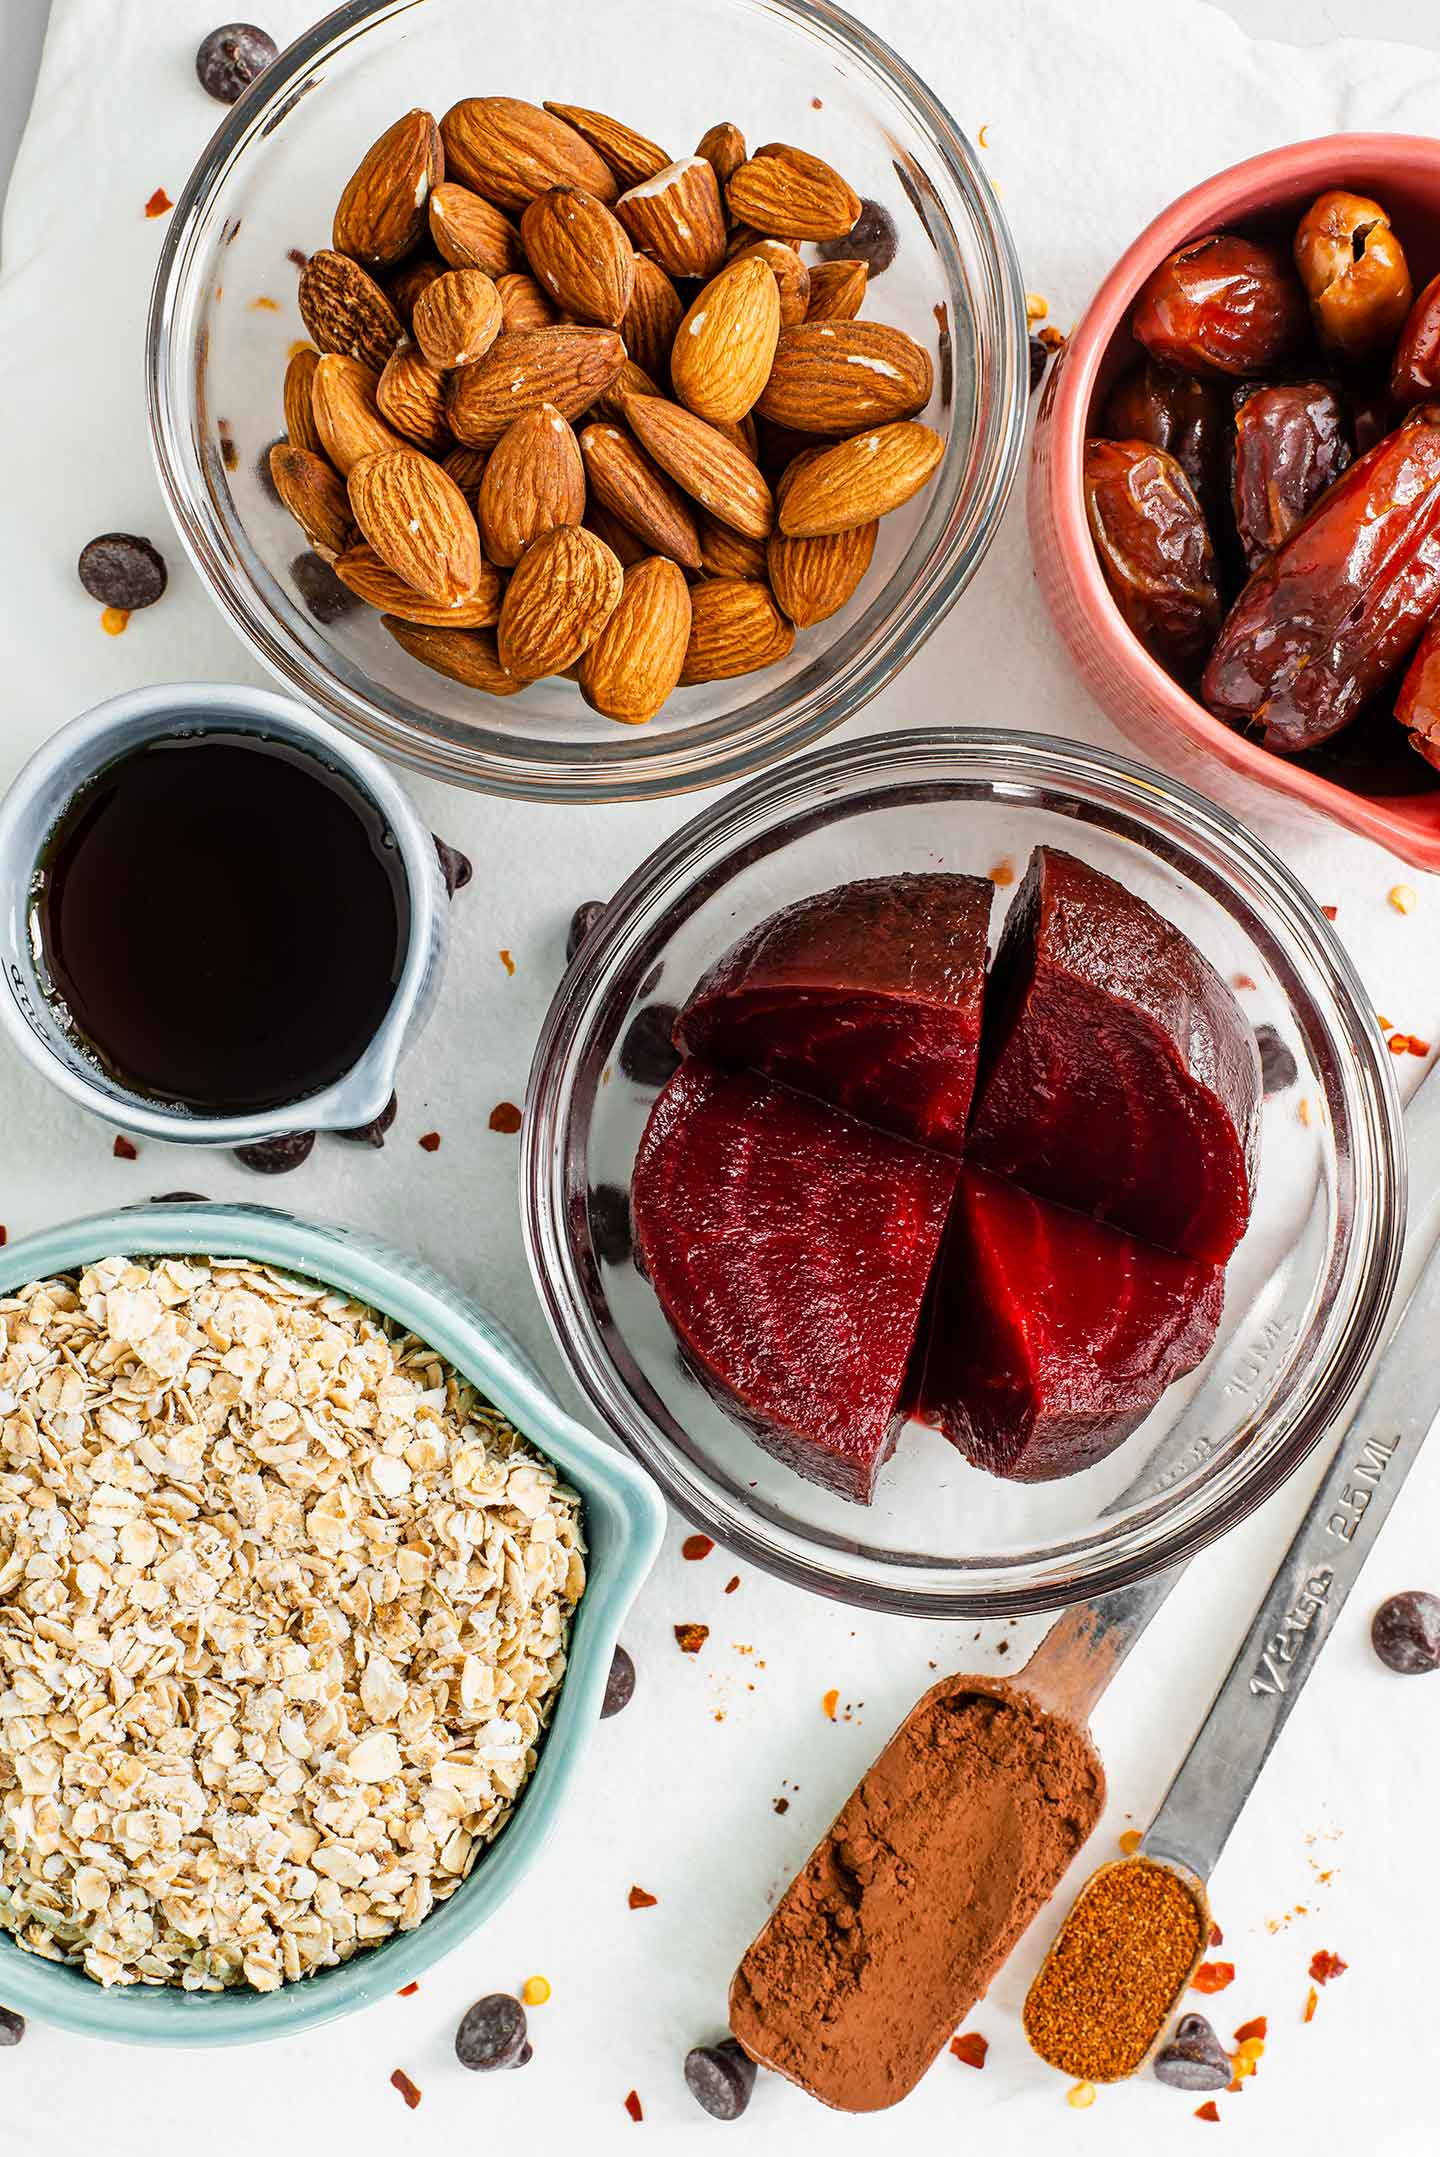 Top down view of ingredients in separate dishes. Red beets, almonds, dates, oats, maple syrup, cocoa powder, chili powder, and chocolate chips. 